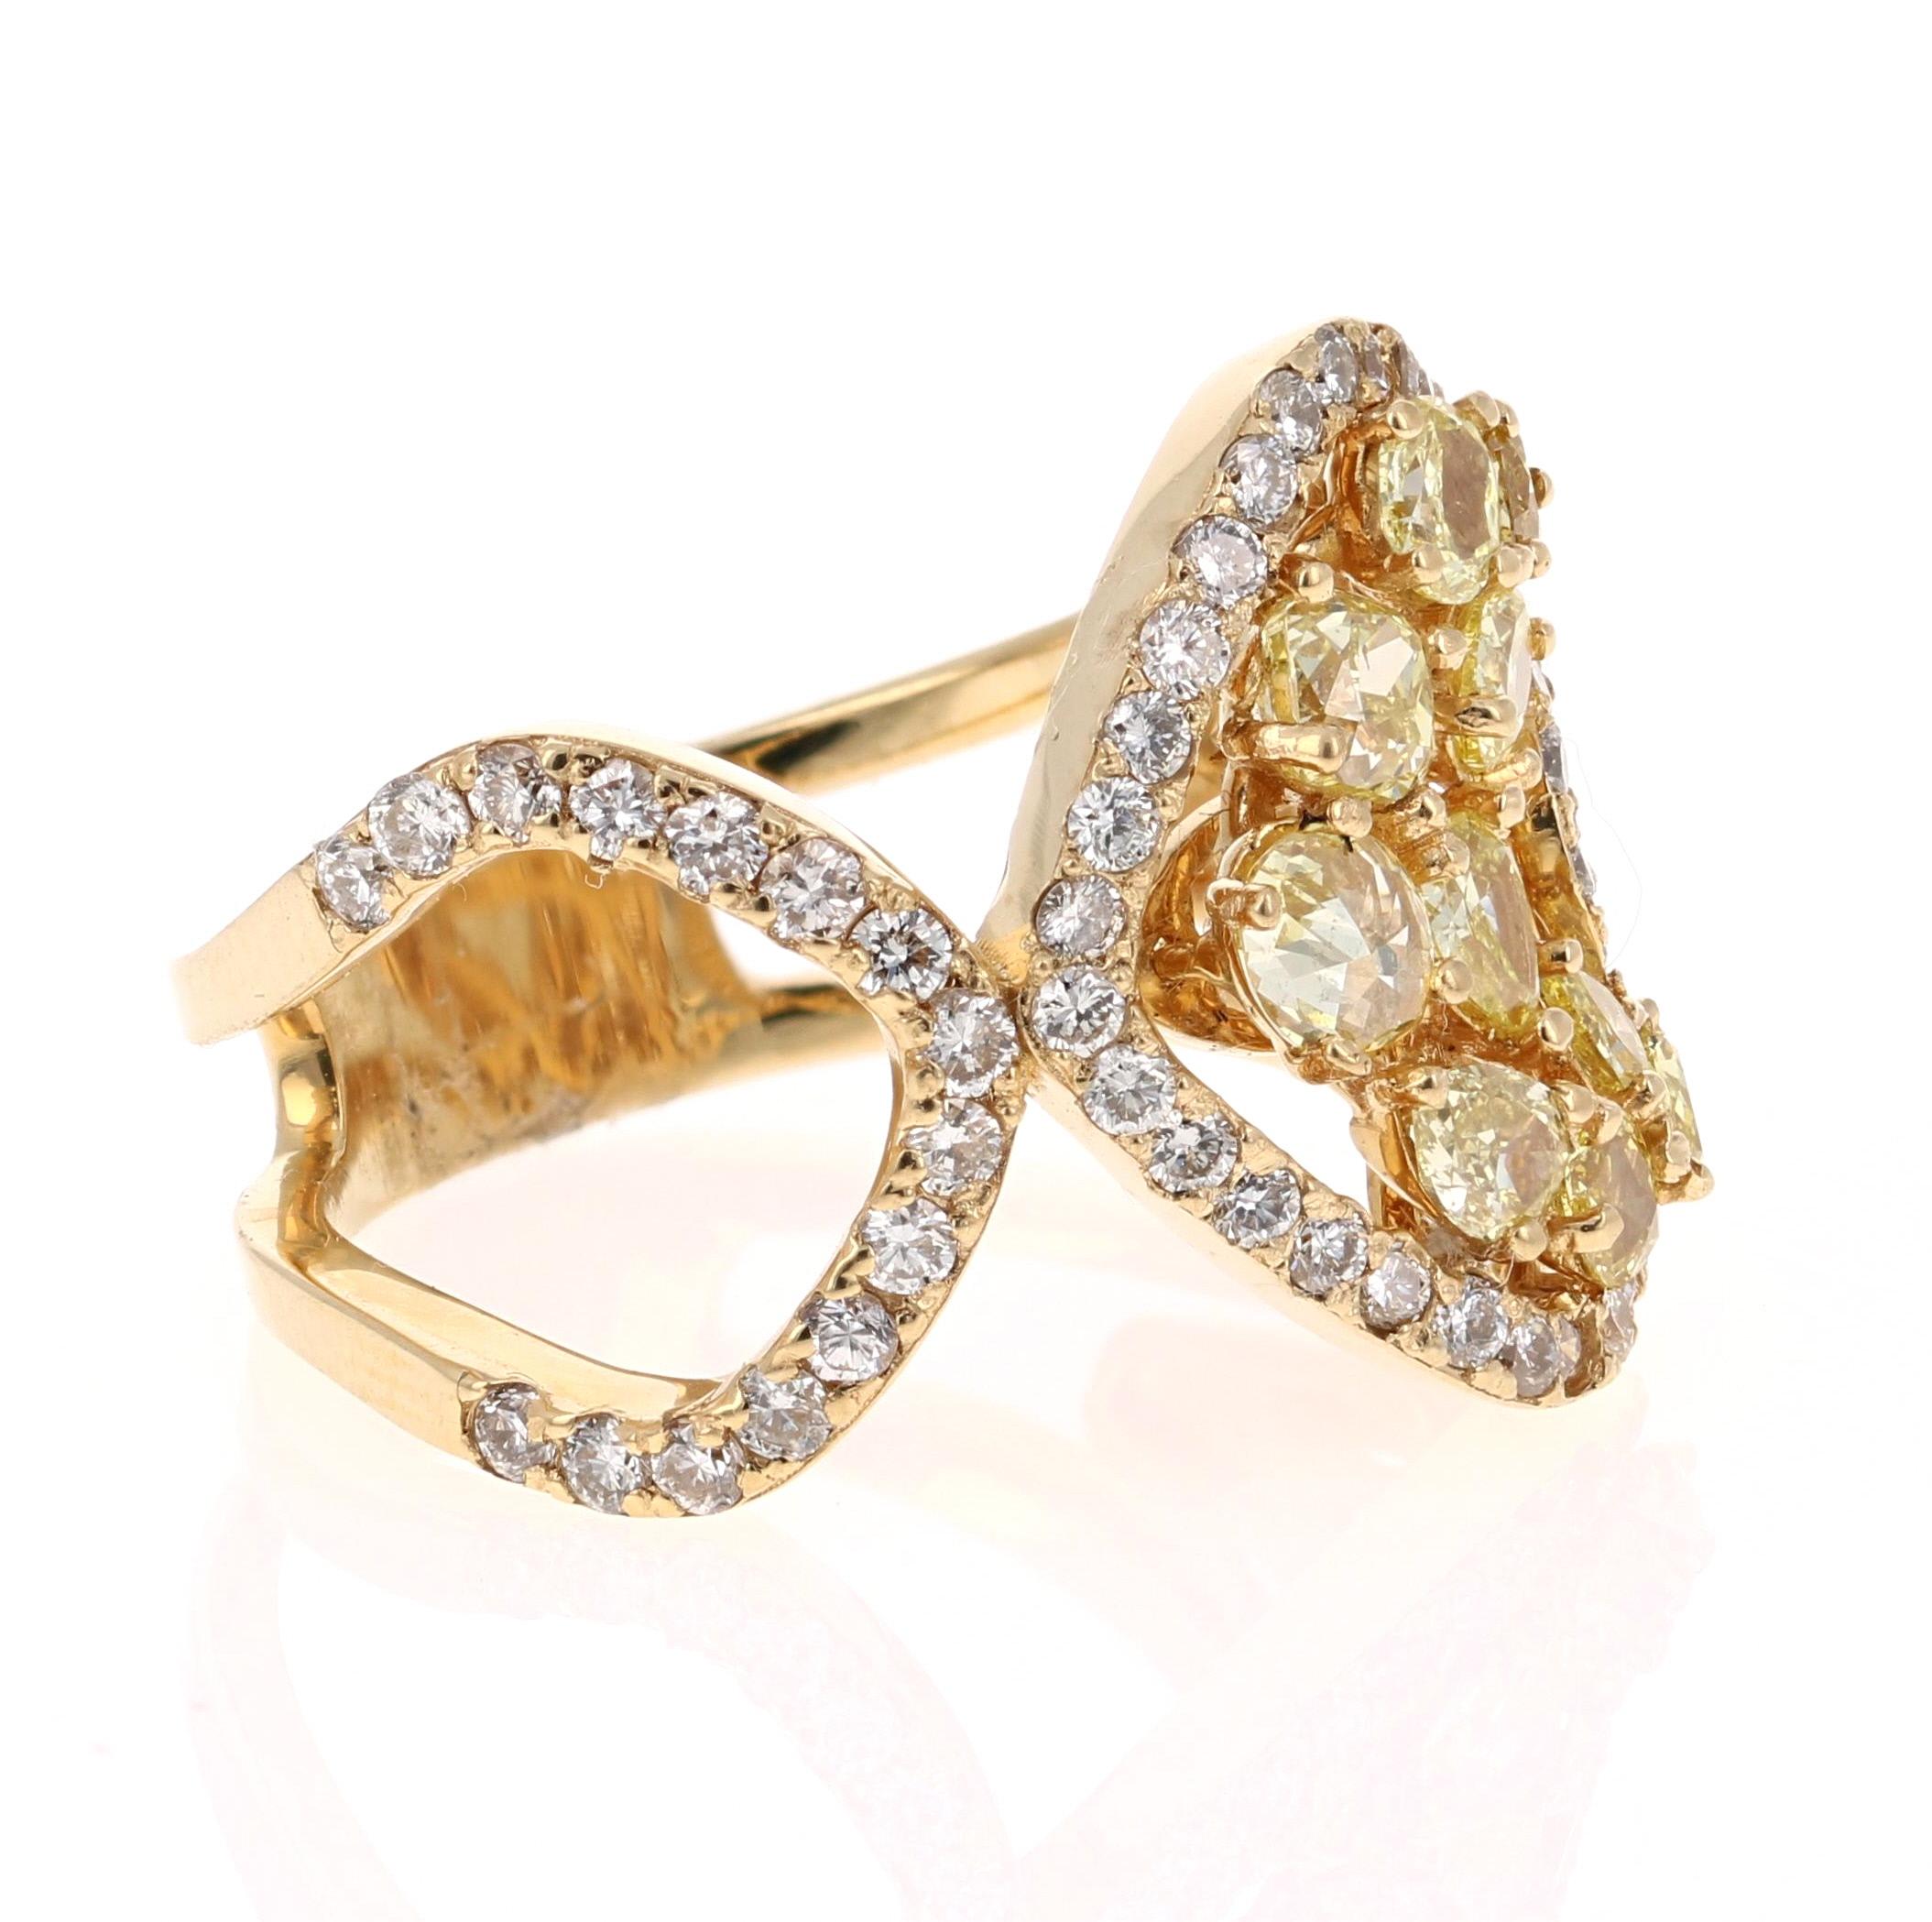 Nothing but a Stunning Beauty! 

This 18 Karat Yellow Gold Ring has 10 Fancy Yellow Diamonds that weigh 1.05 Carats. It is adorned with 62 Round Cut White Diamonds that weigh 0.86 Carats. (Clarity: VS, Color: H) 

The ring weighs approximately 7.5